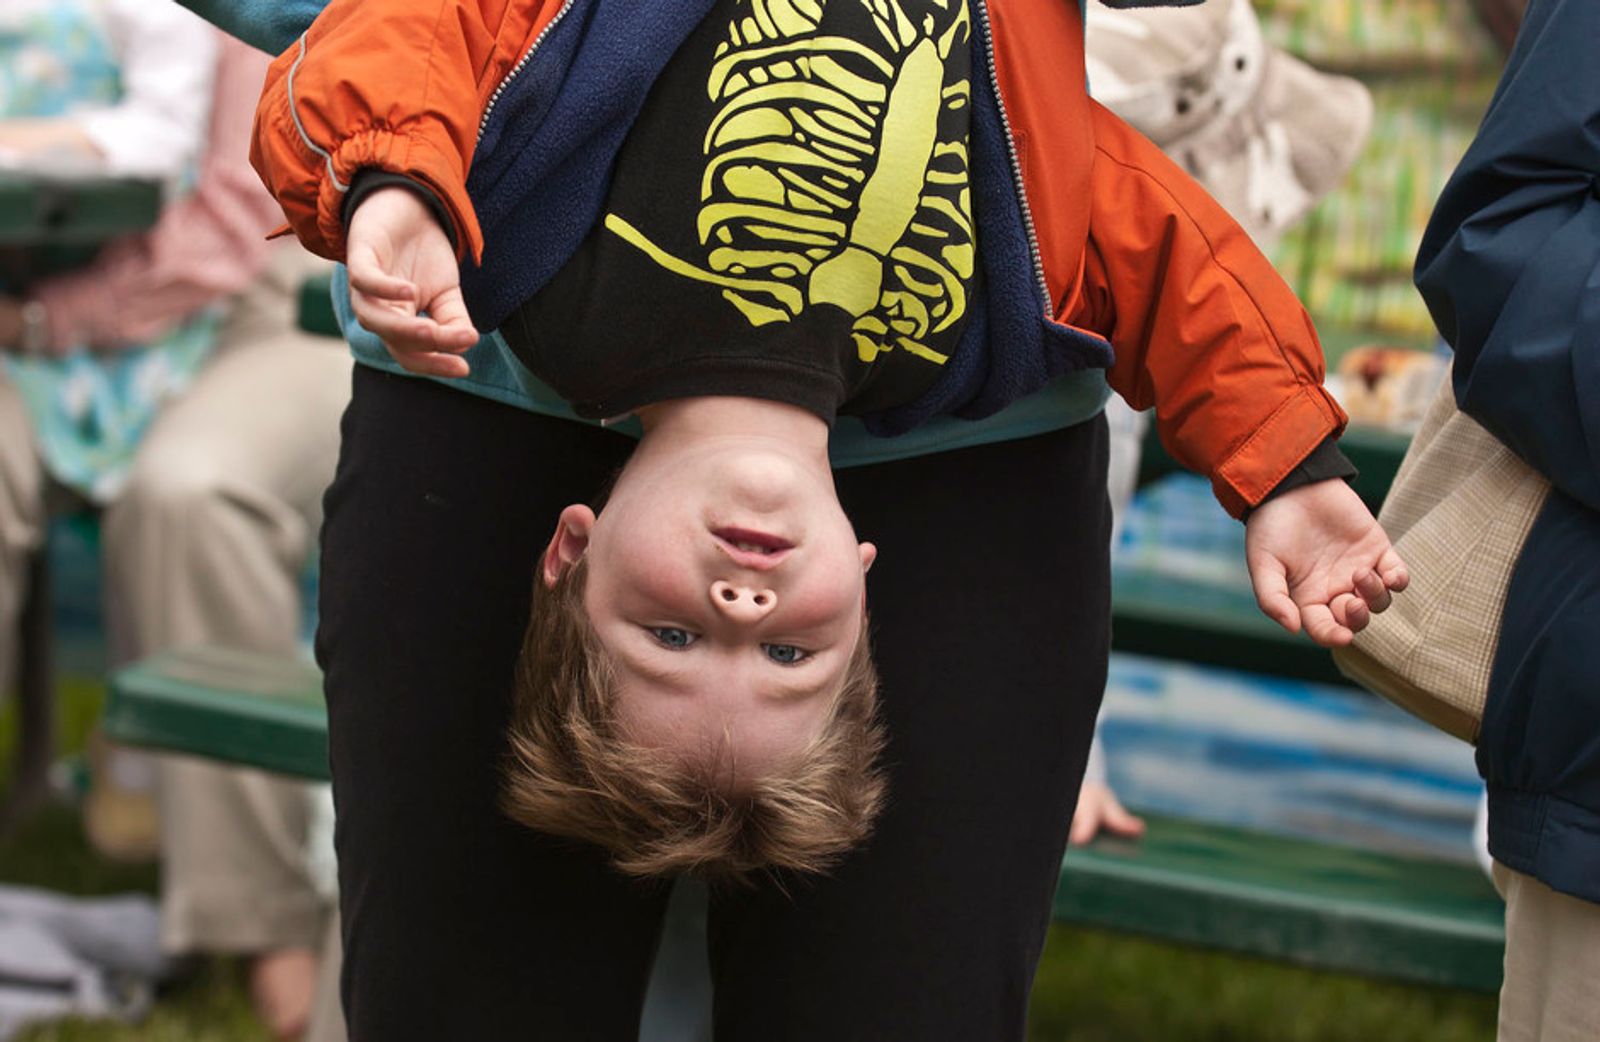 © Steven Edson - Young boy in costume is being held upside down by his father. Newton, MA